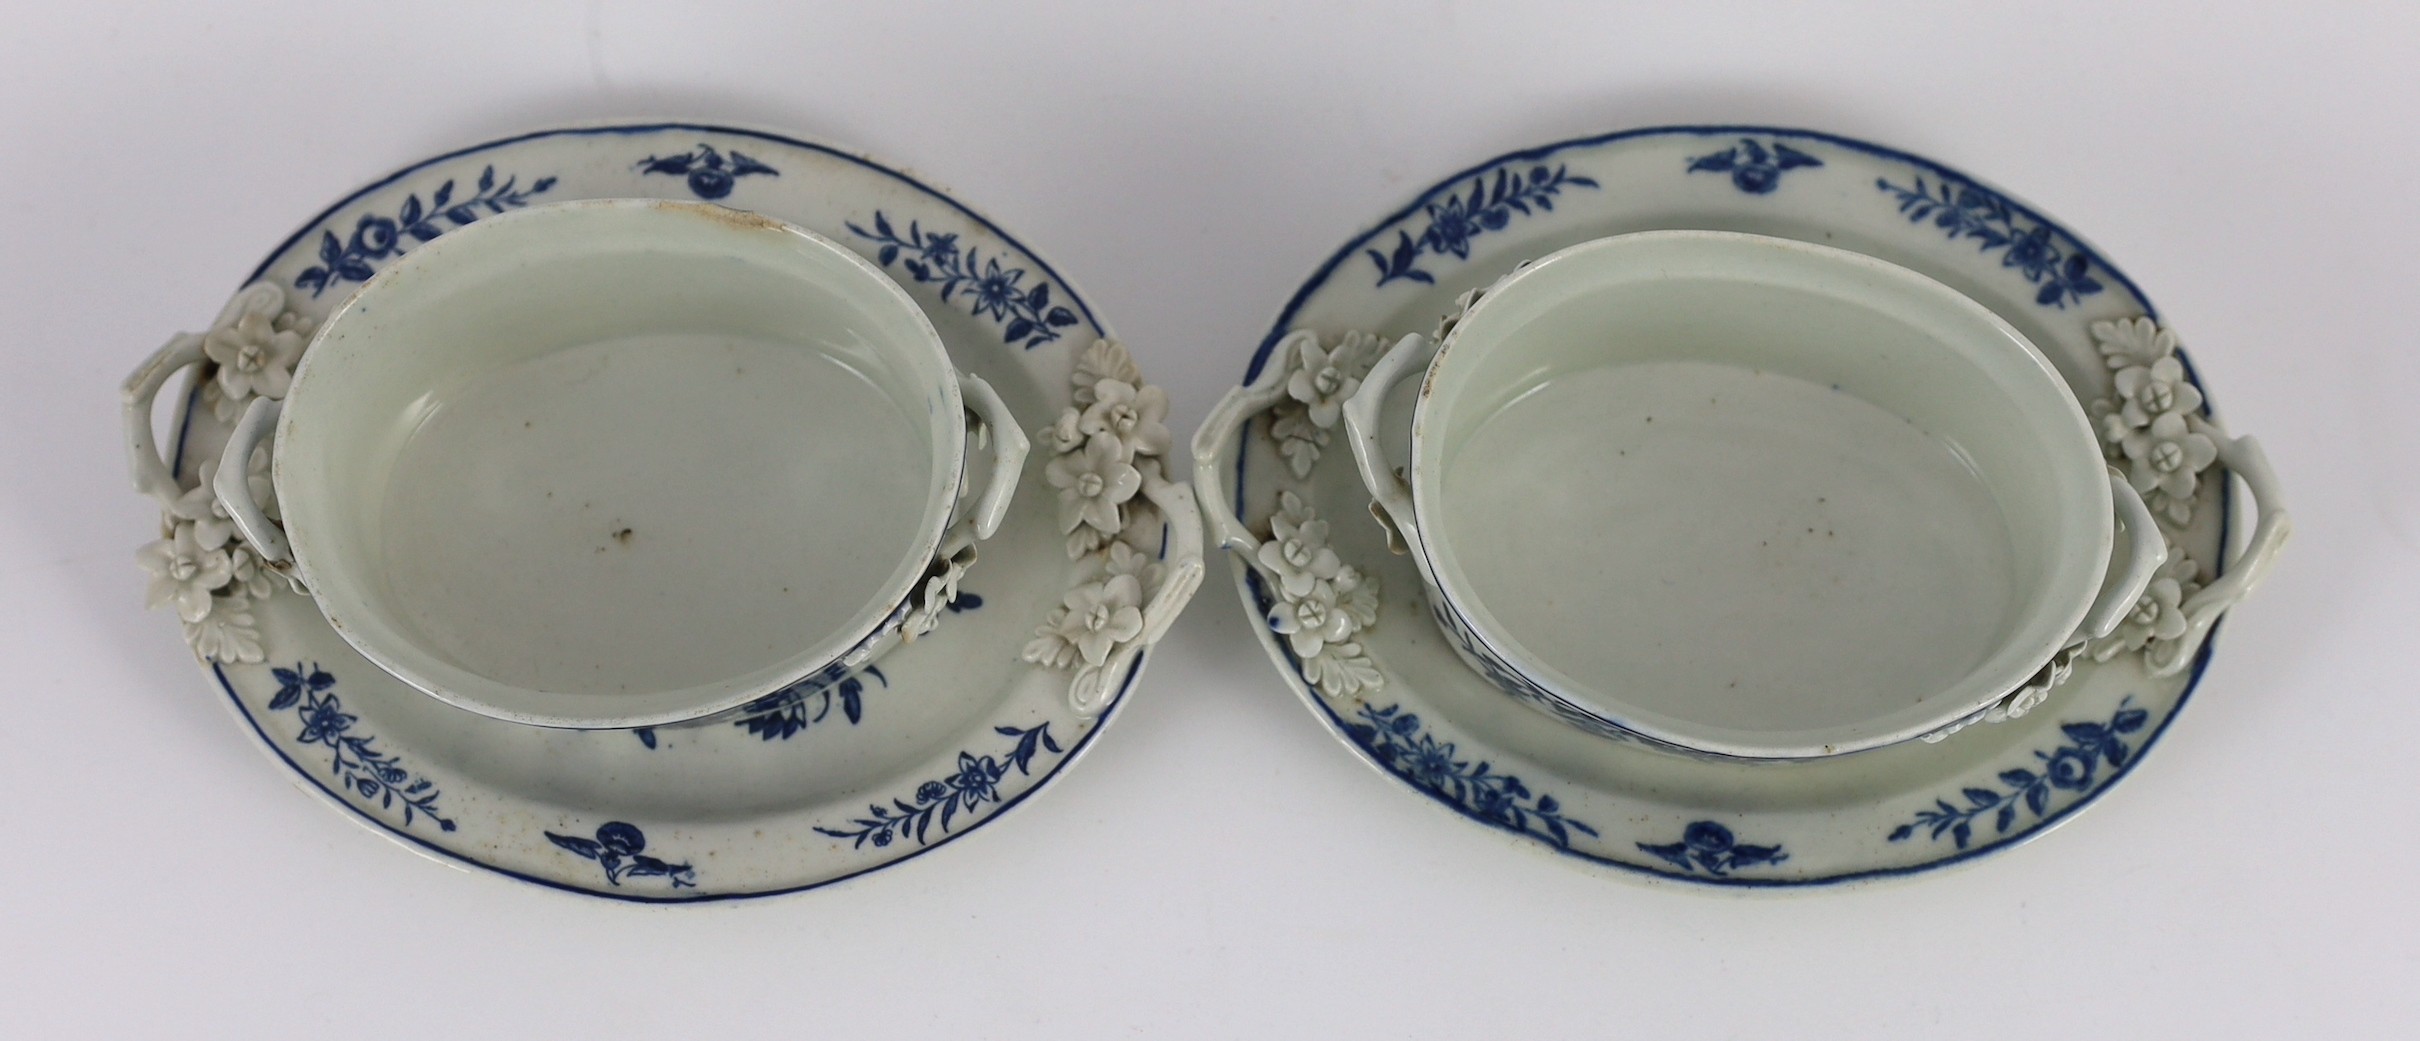 A pair of Caughley blue and white butter tubs, covers and stands, c.1780, stands 19cms wide, tubs and covers 9cms high